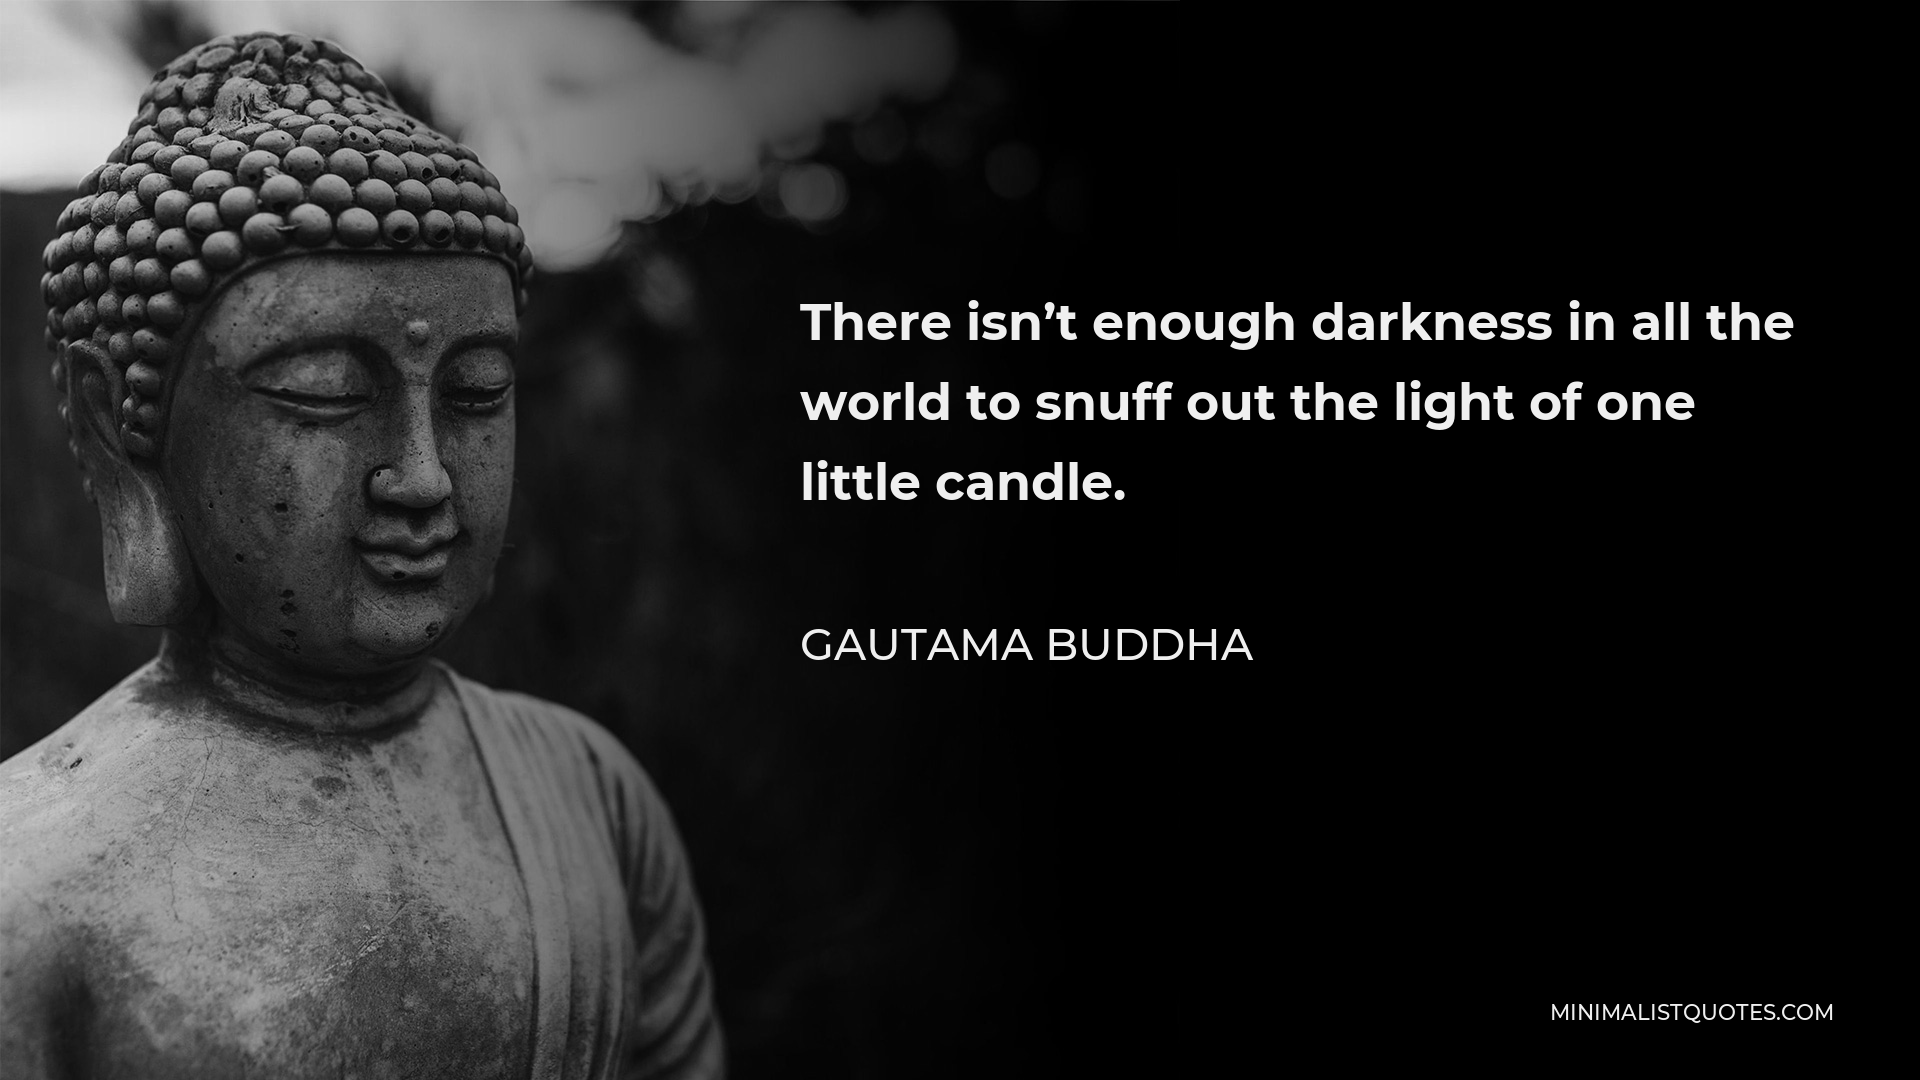 Gautama Buddha Quote - There isn’t enough darkness in all the world to snuff out the light of one little candle.